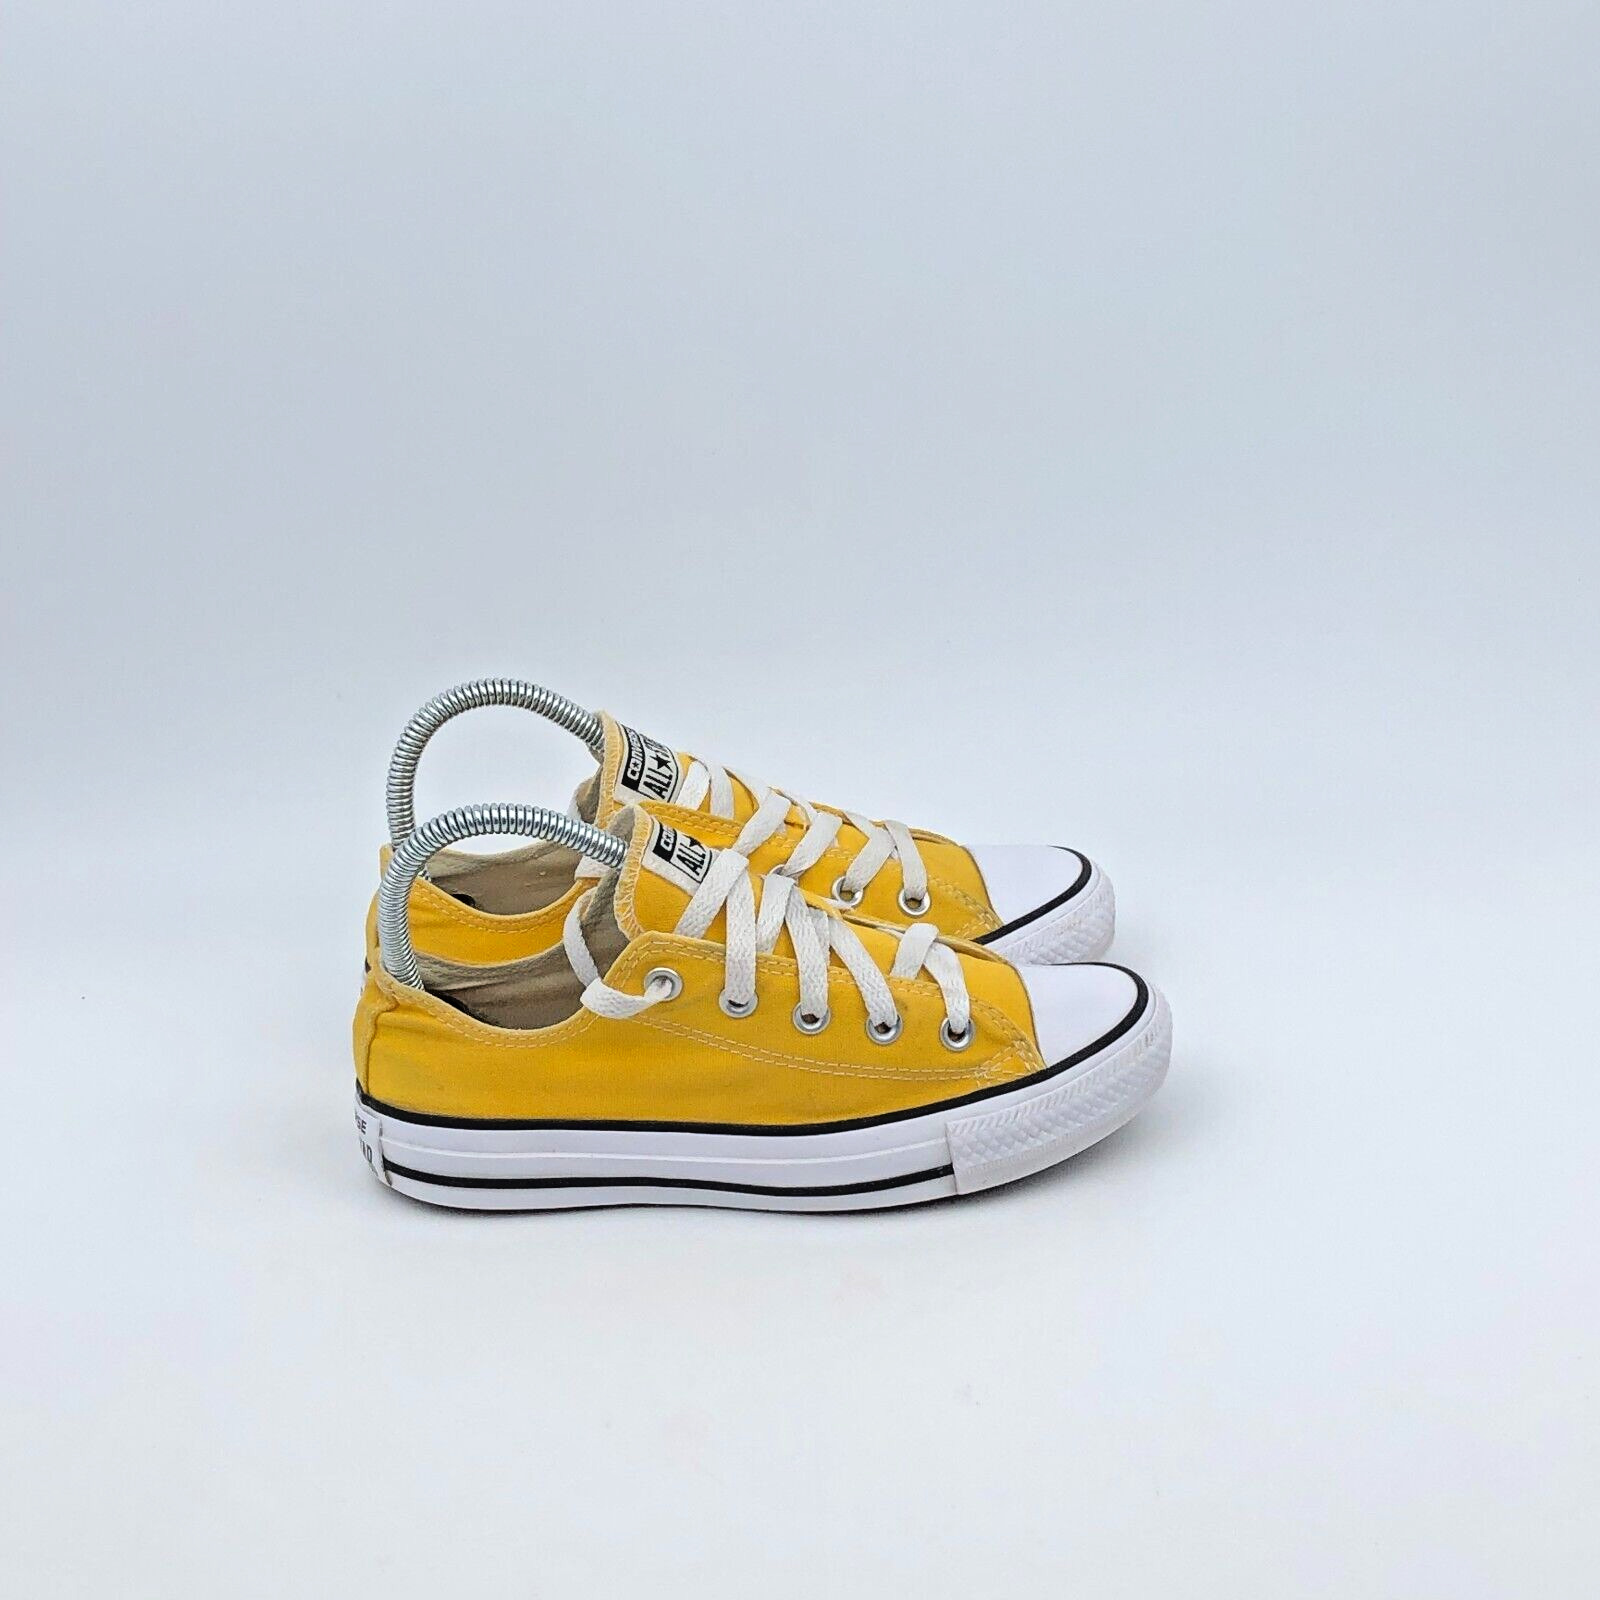 Converse Chuck Taylor Shoes Women&apos;s Size 6 Yellow White Canvas Sneakers